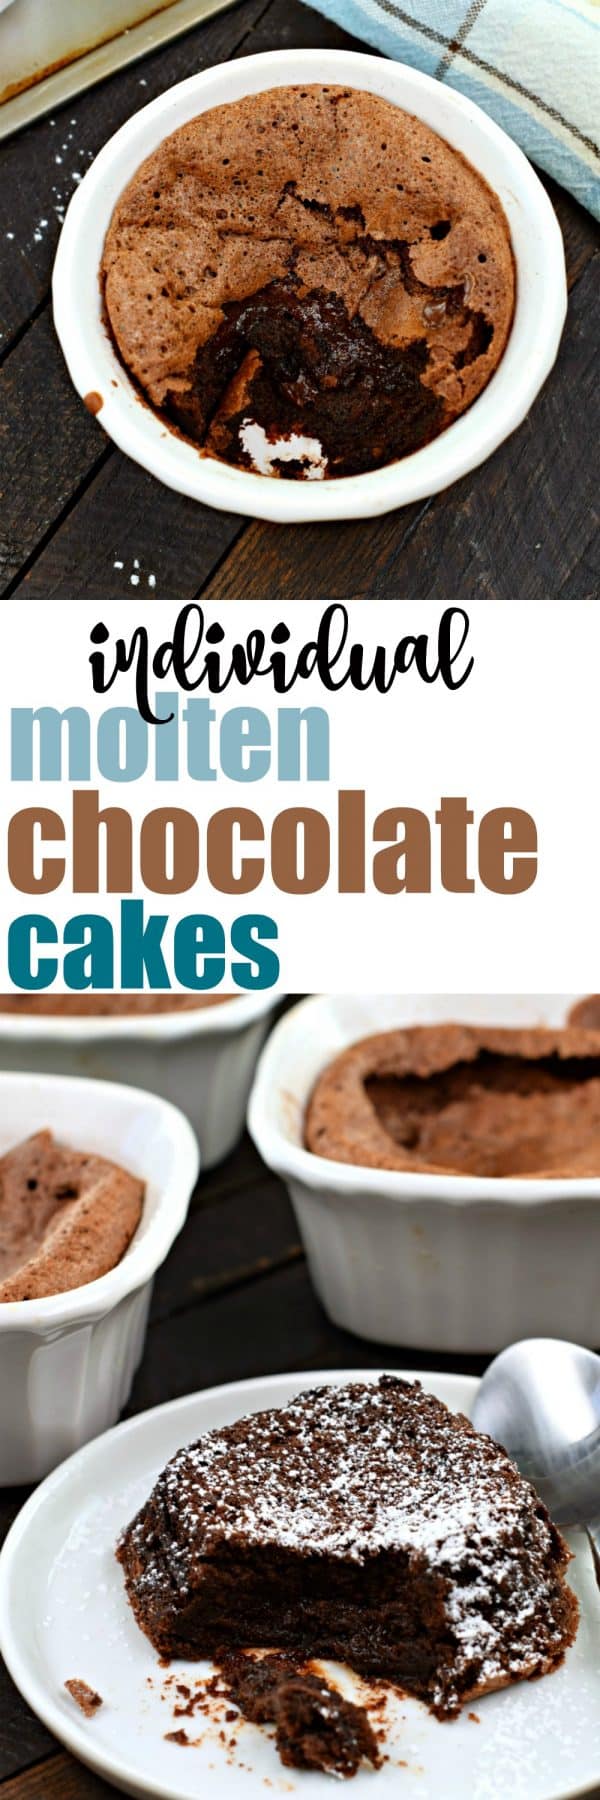 Individual Molten Chocolate Cakes - Shugary Sweets